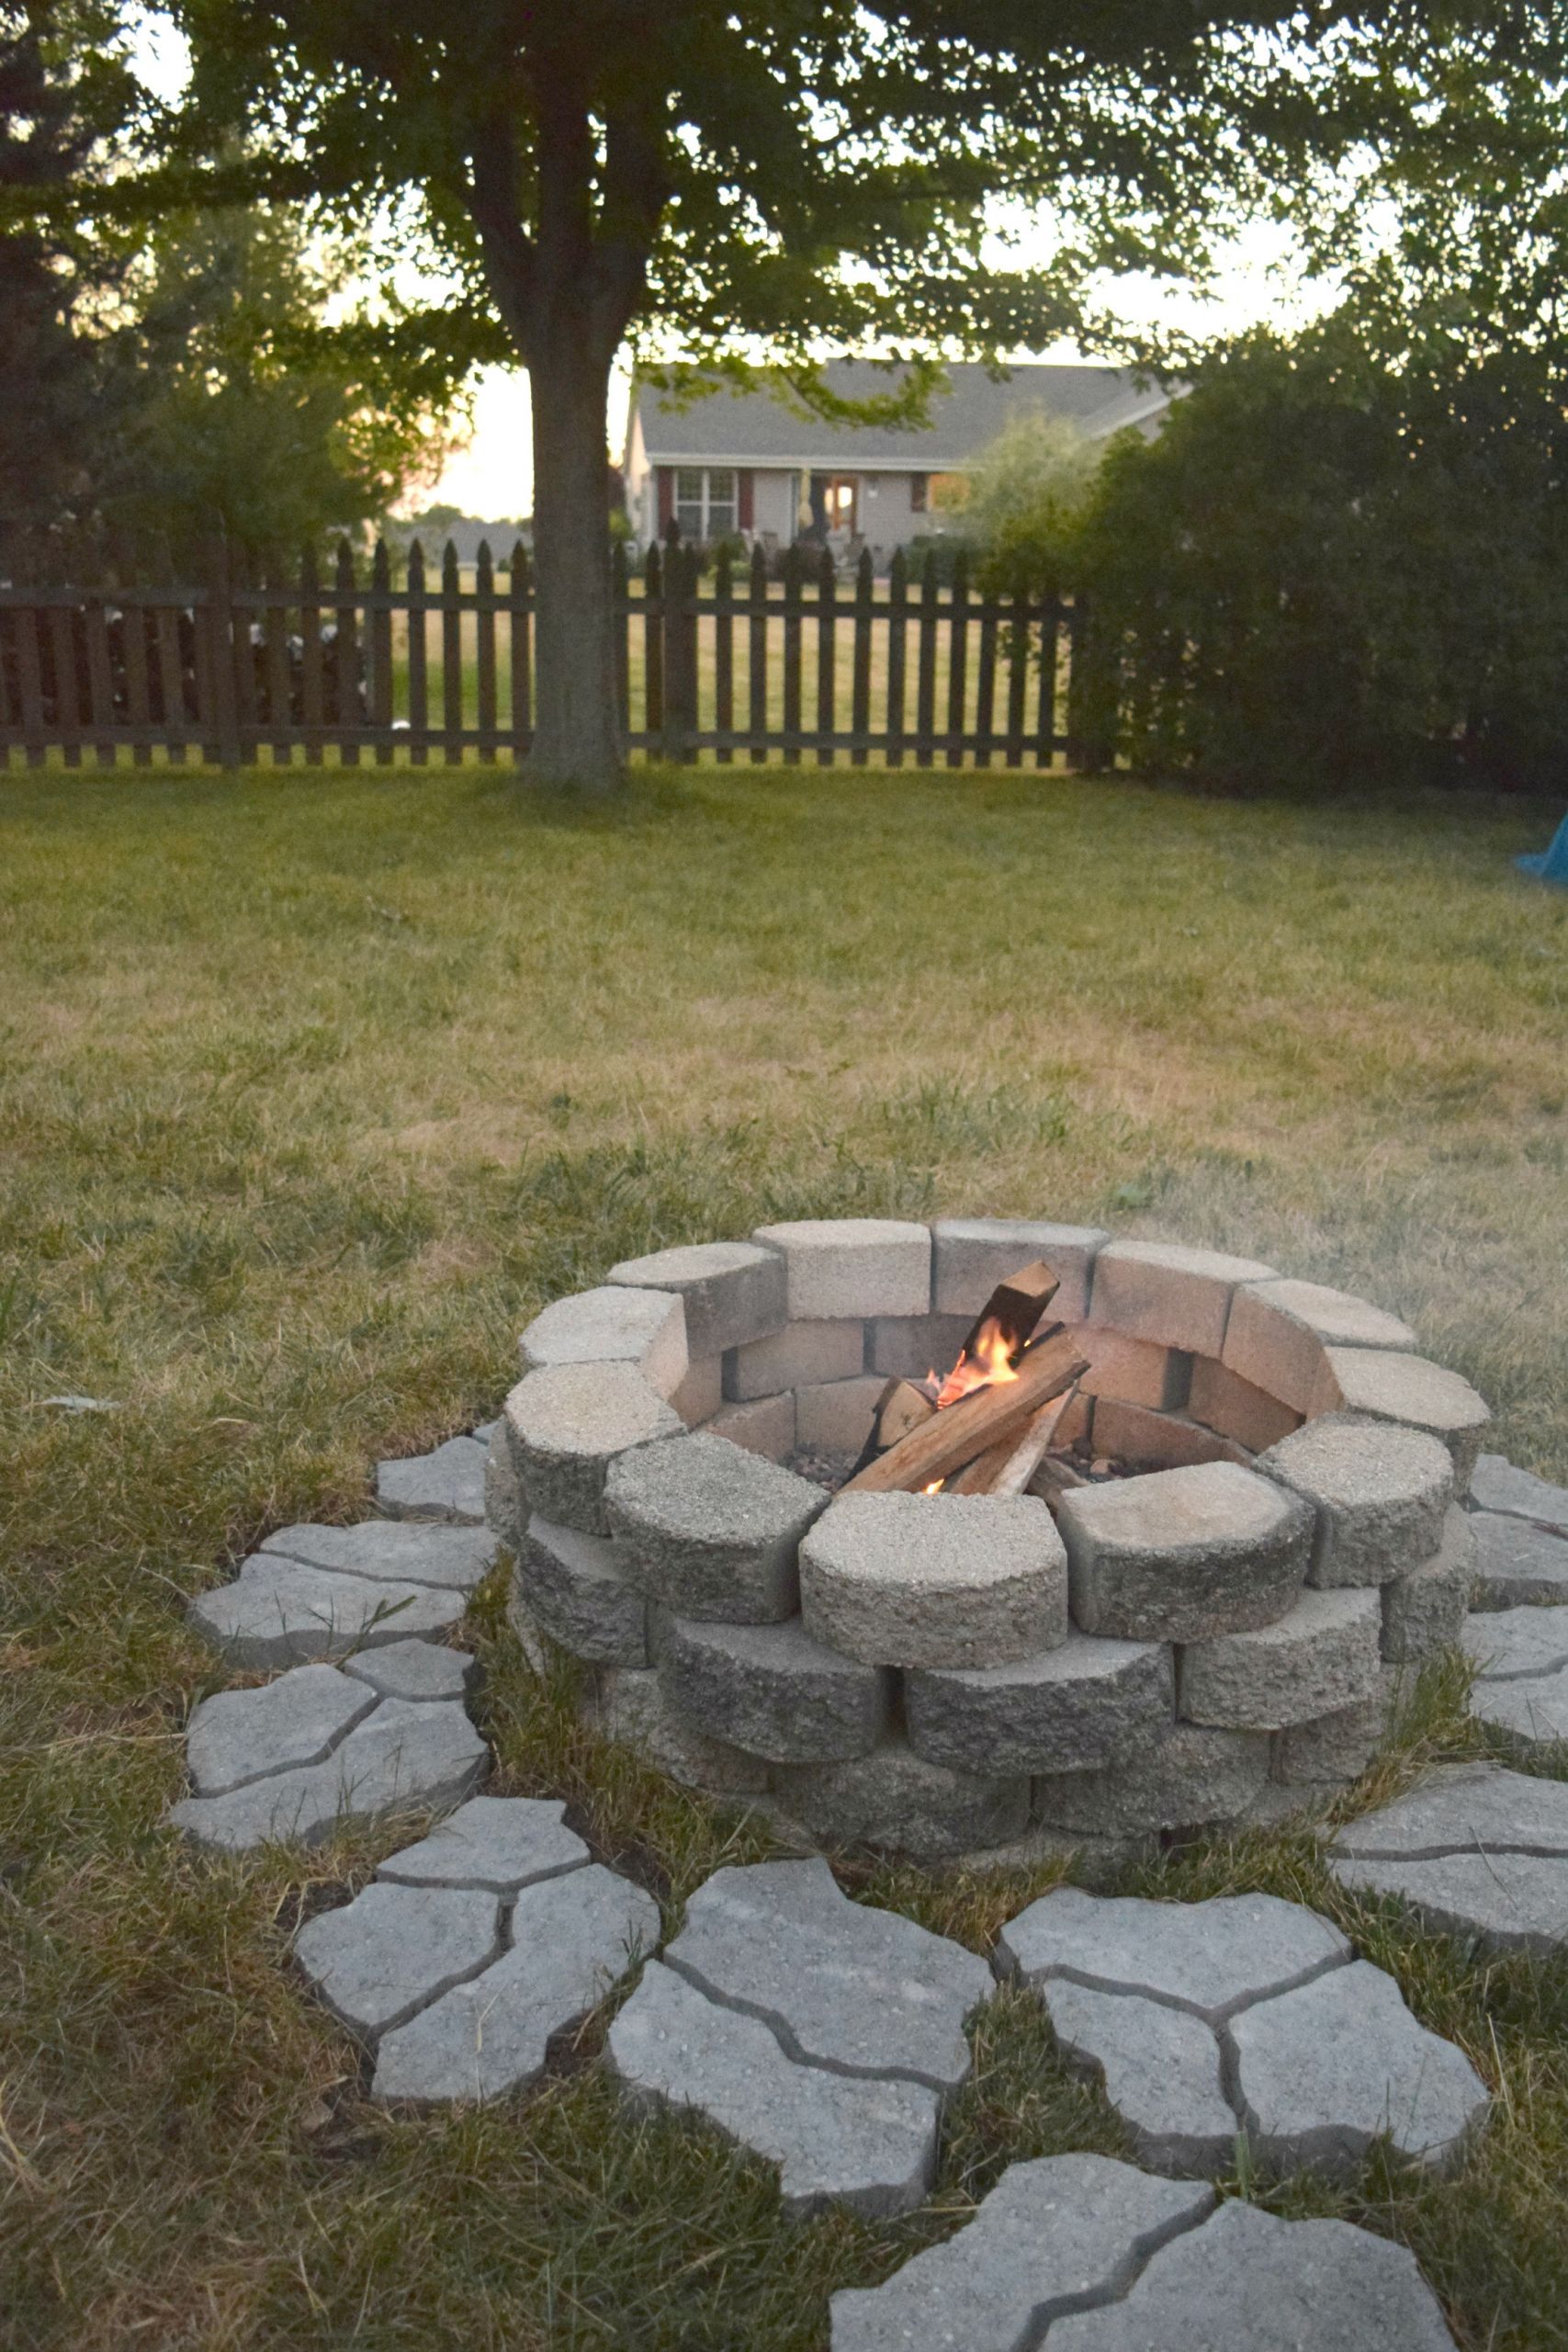 DIY Fire Pits Outdoor
 "Light up the Night" outdoor living in the sparkle of